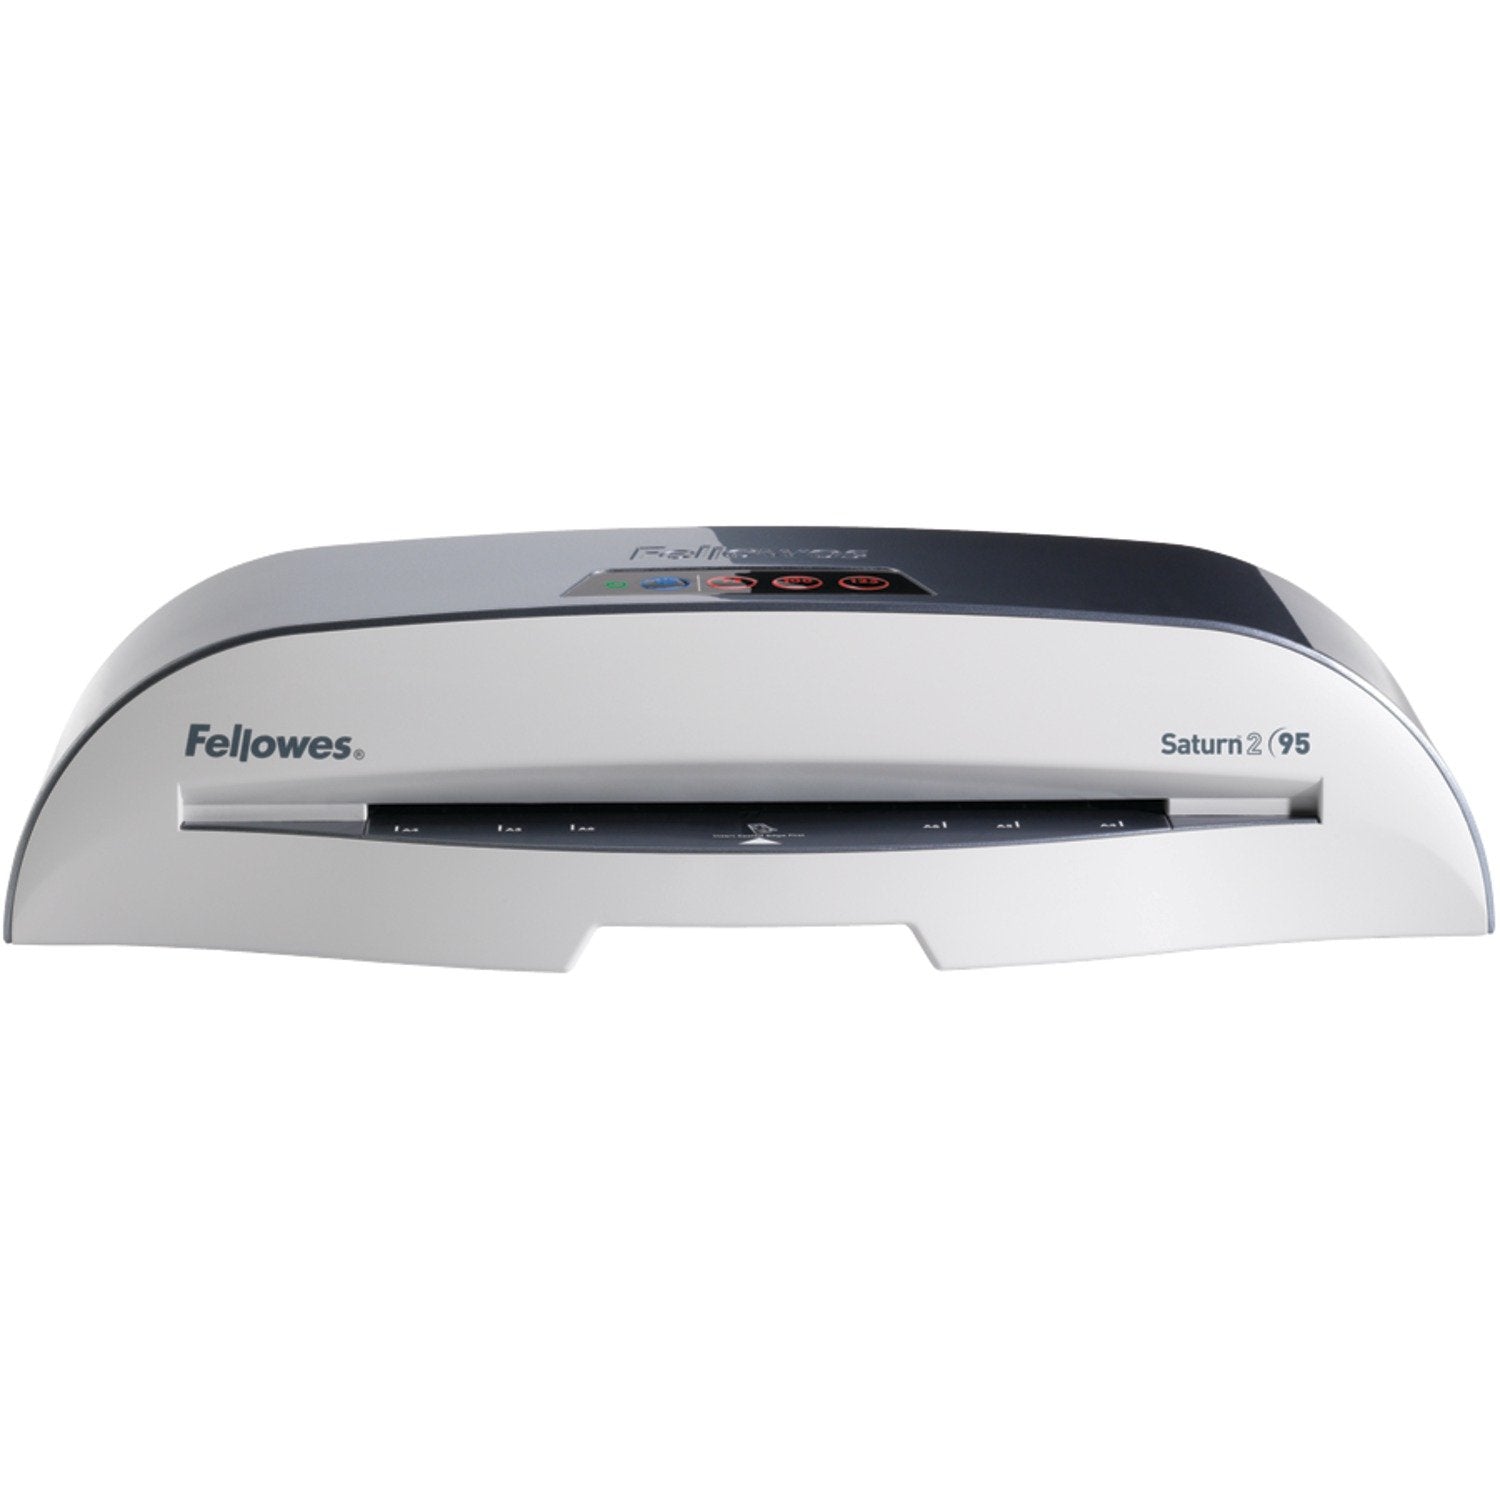 Fellowes Saturn 2 A4 Small Office Laminator with 100% Jam Free / Mechanism and HeatGuard